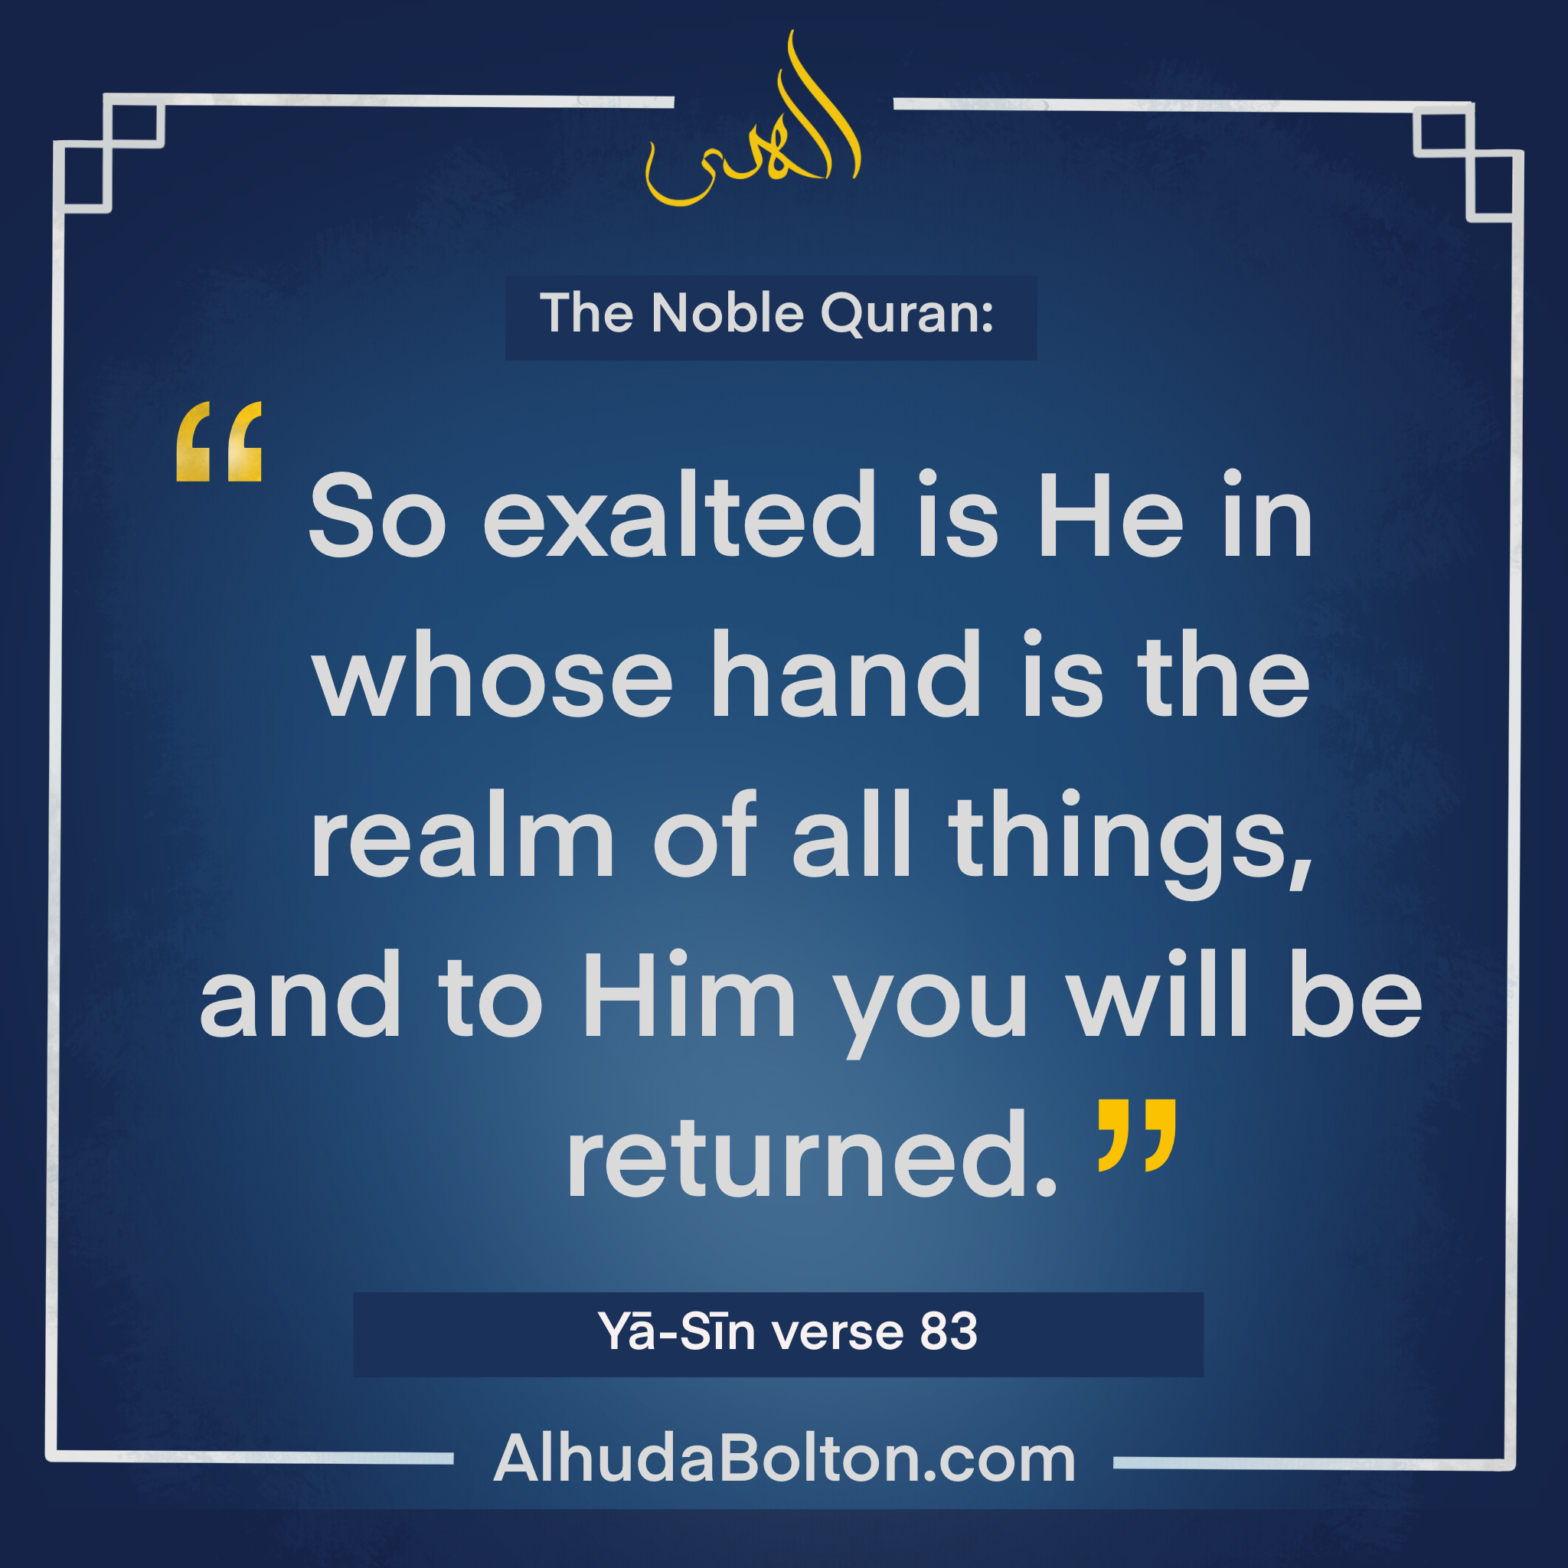 Weekly Qur’an verse: “….and to Him you will be returned”